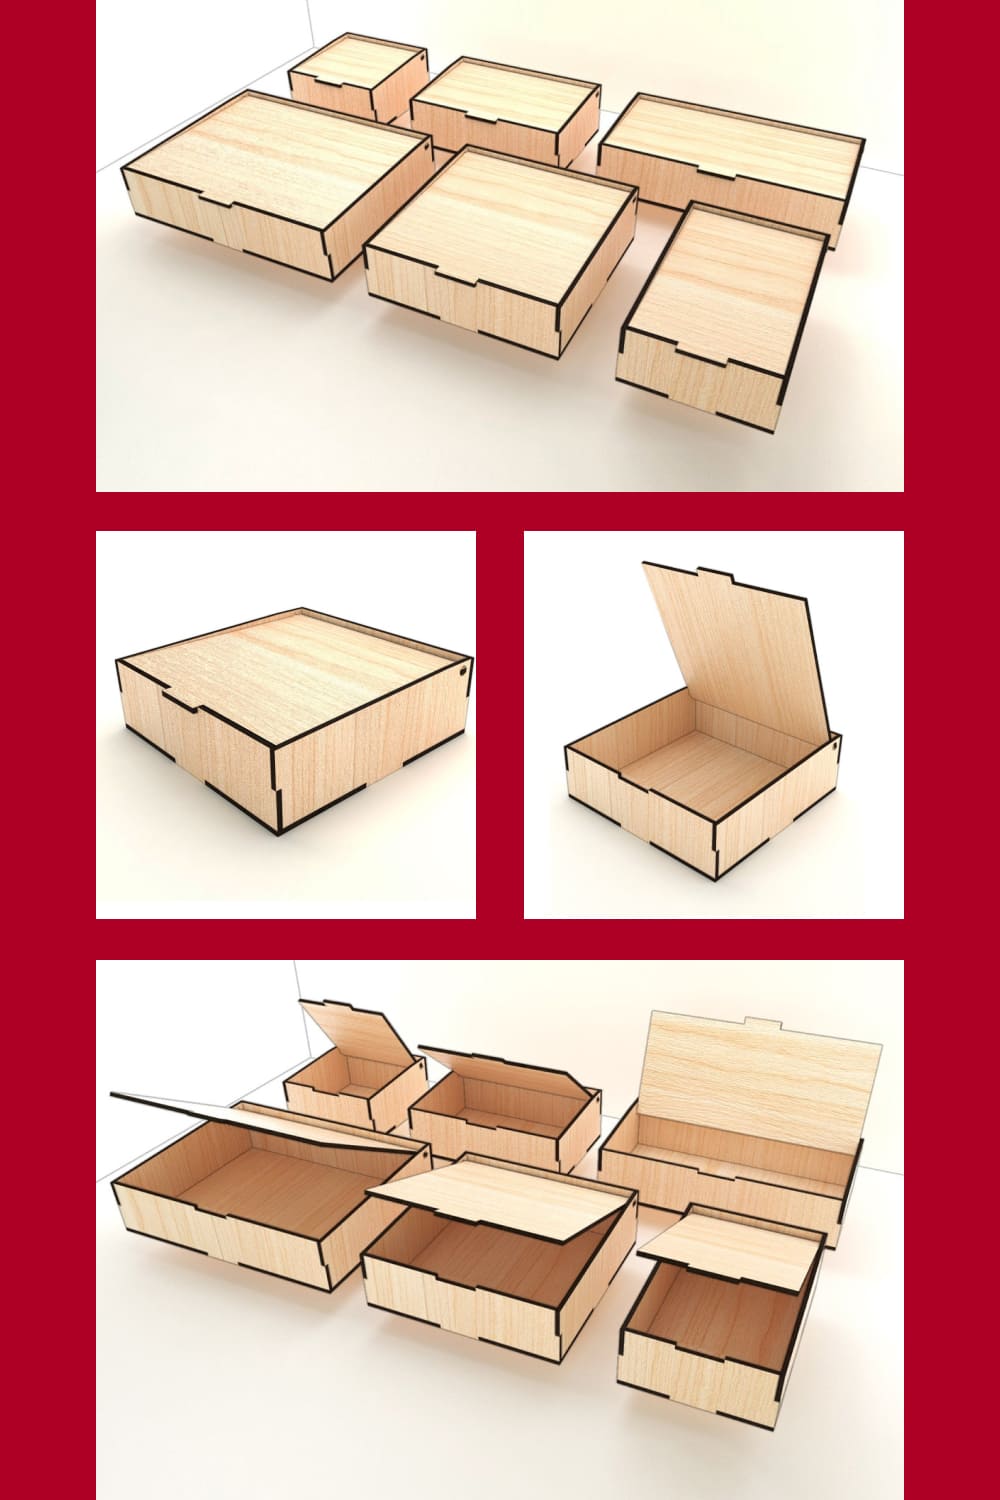 Simple box for different purposes.